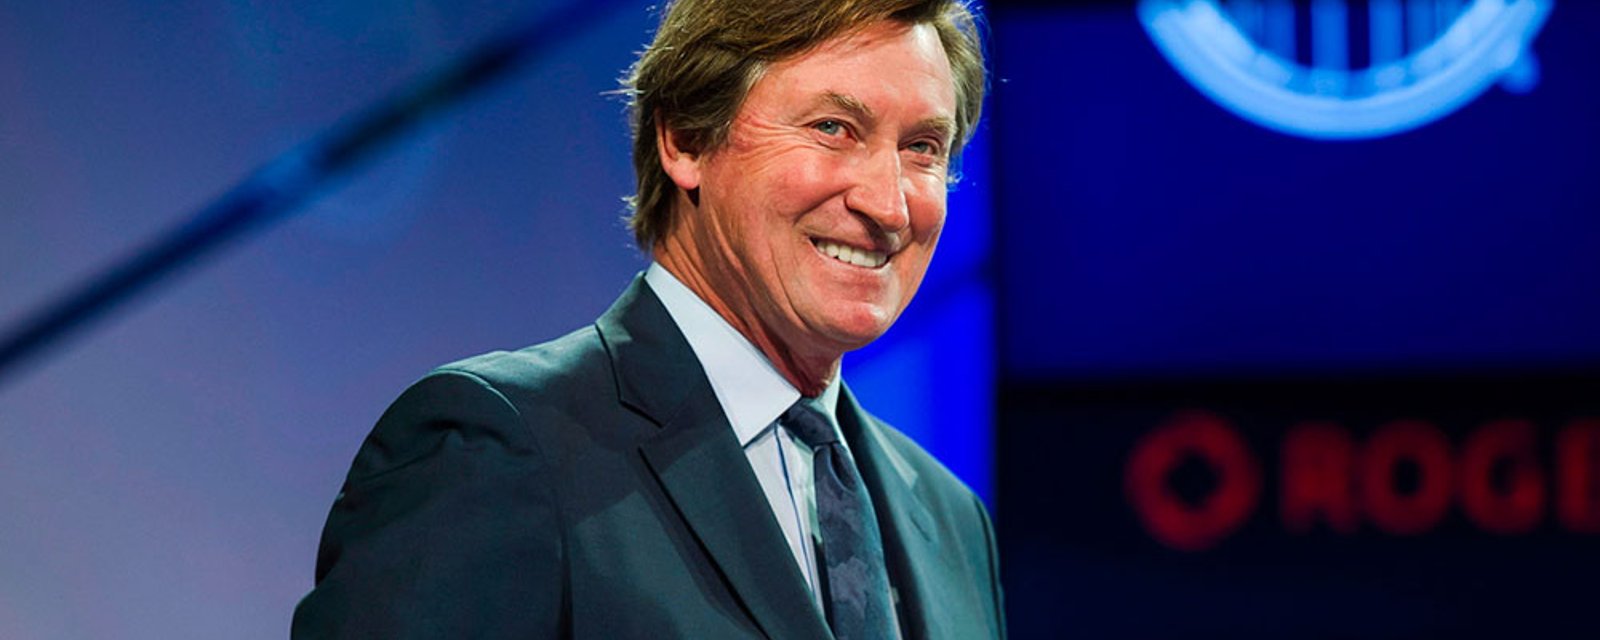 Gretzky has an old friend join him on the TNT NHL broadcast team